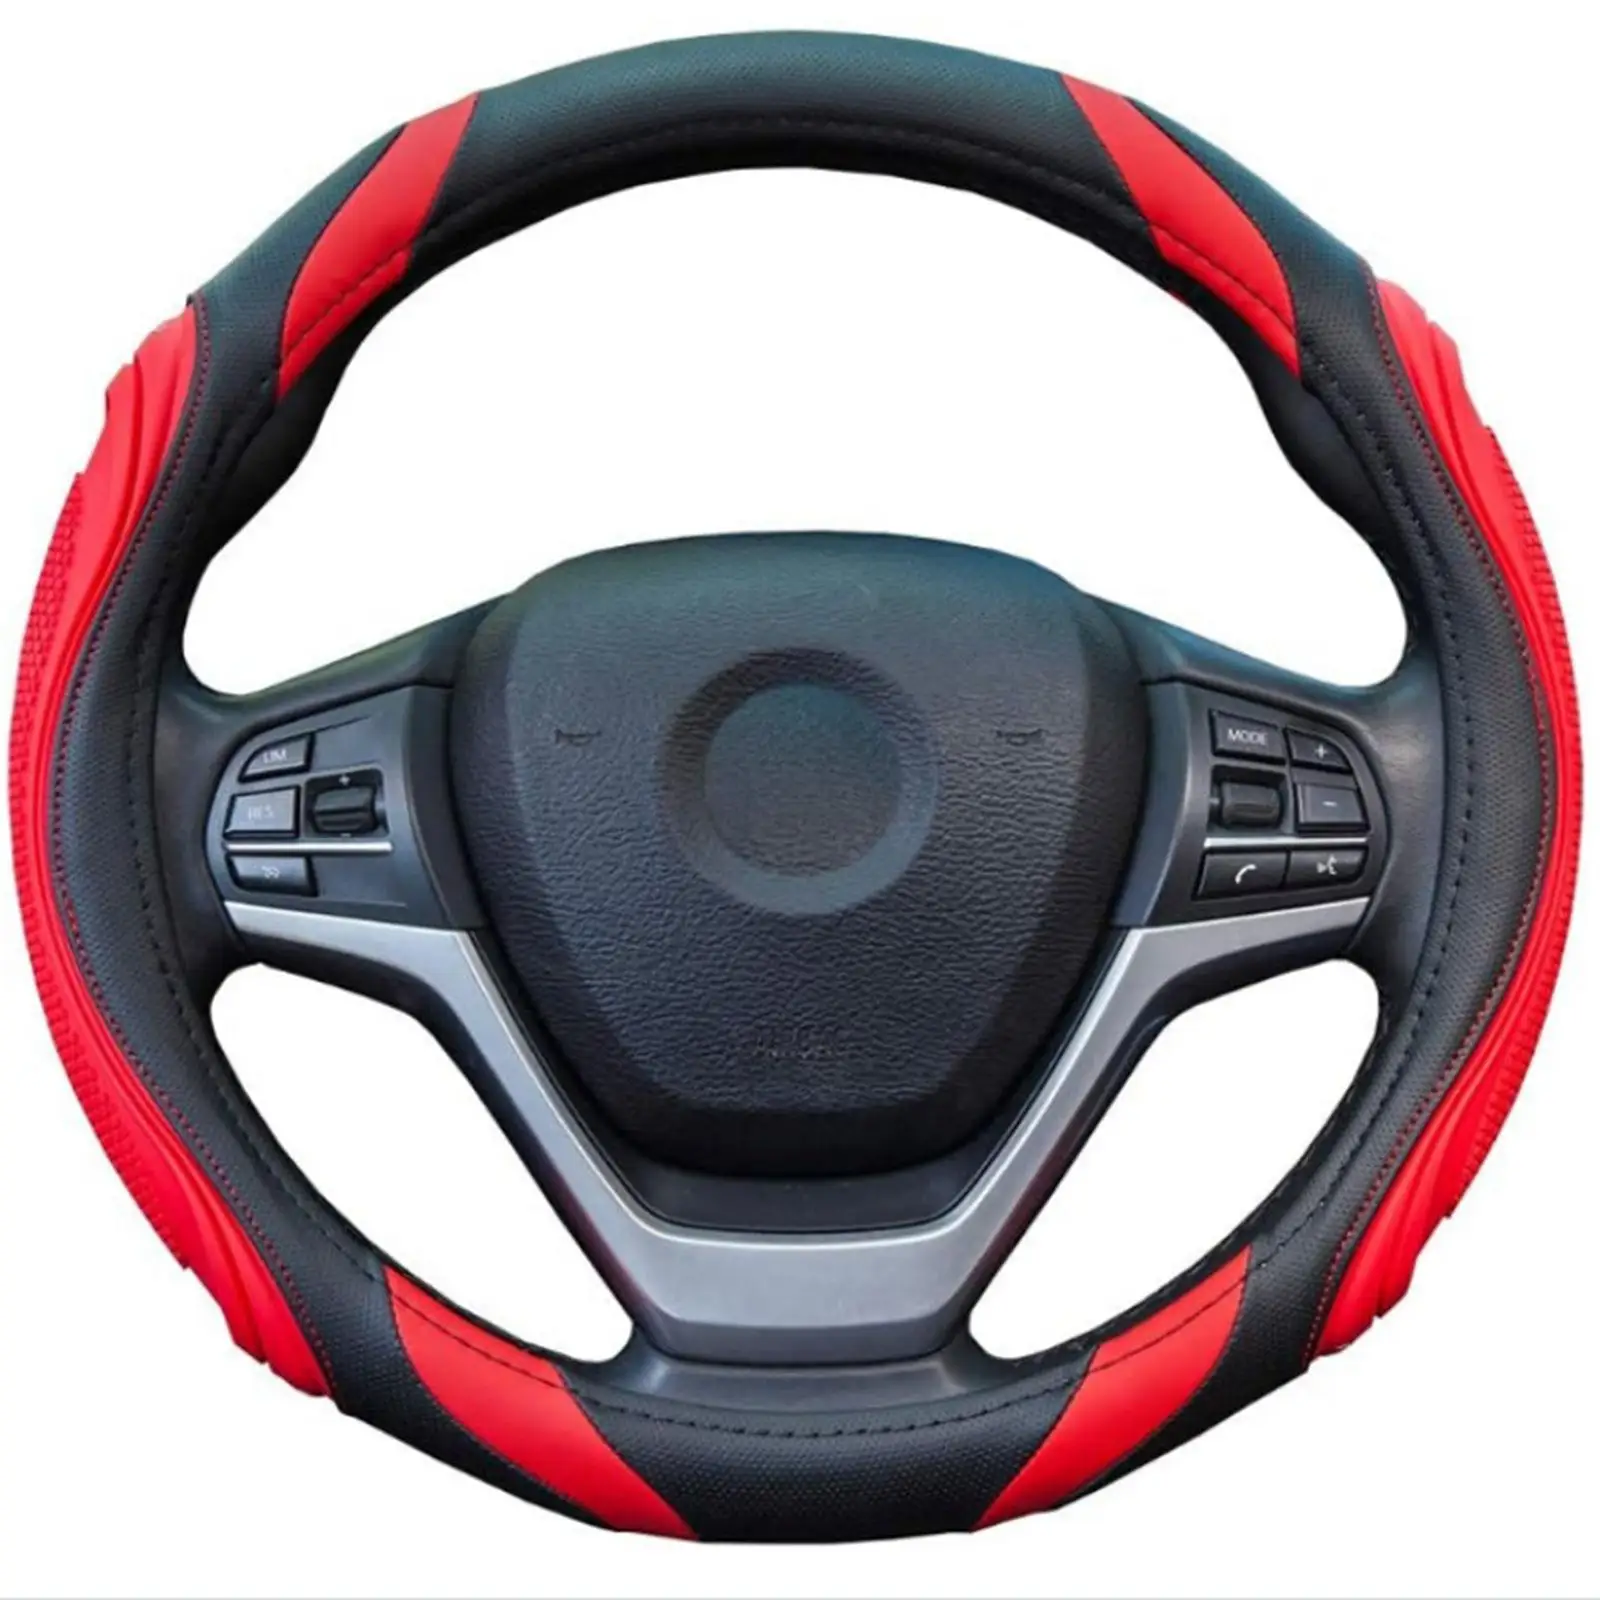 Steering Wheel Cover Protector professional universal Anti Slip Lining